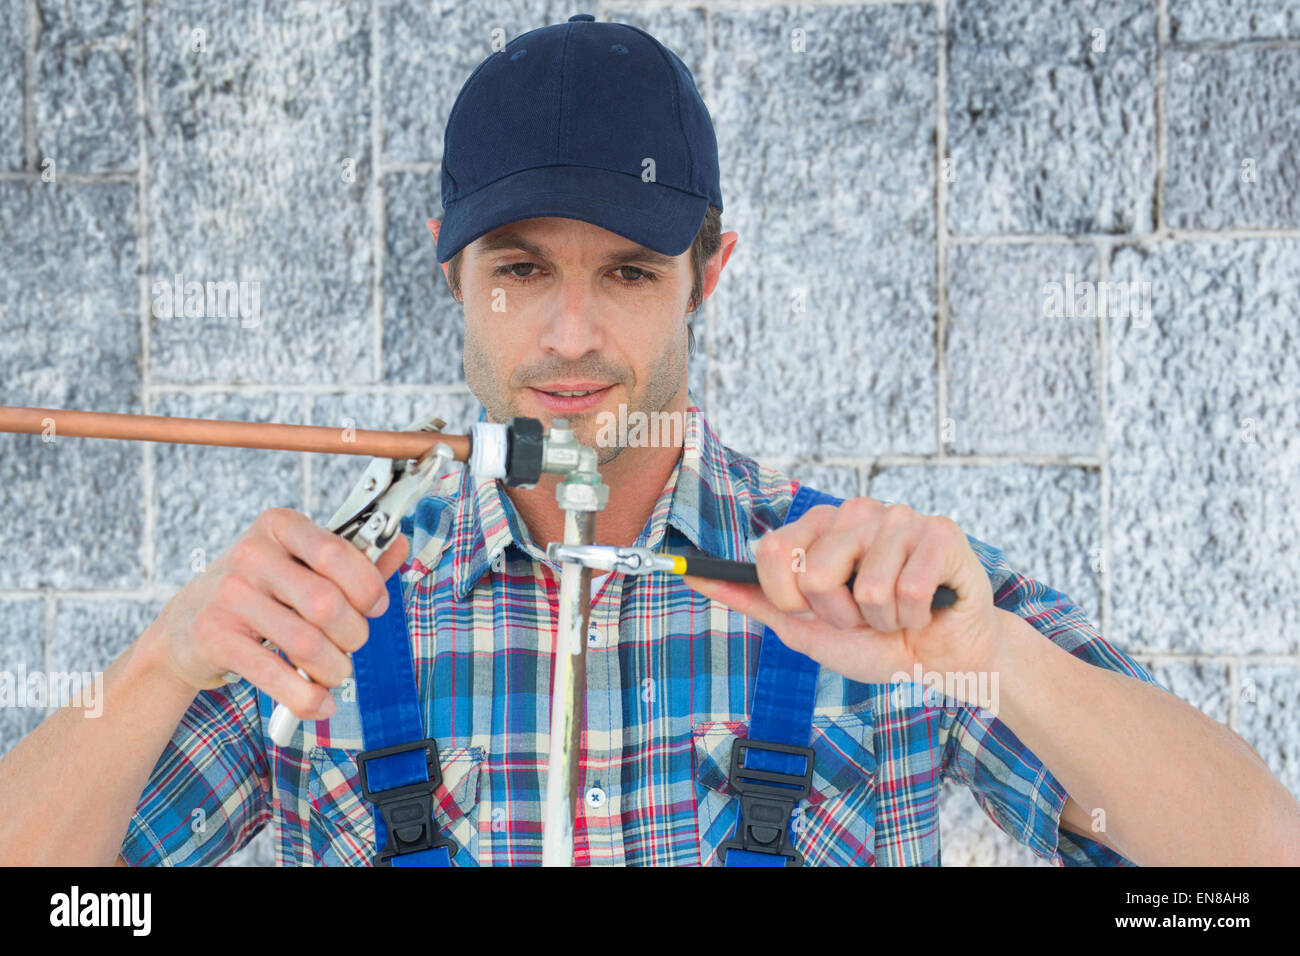 Composite image of plumber fixing pipe over white background Stock Photo